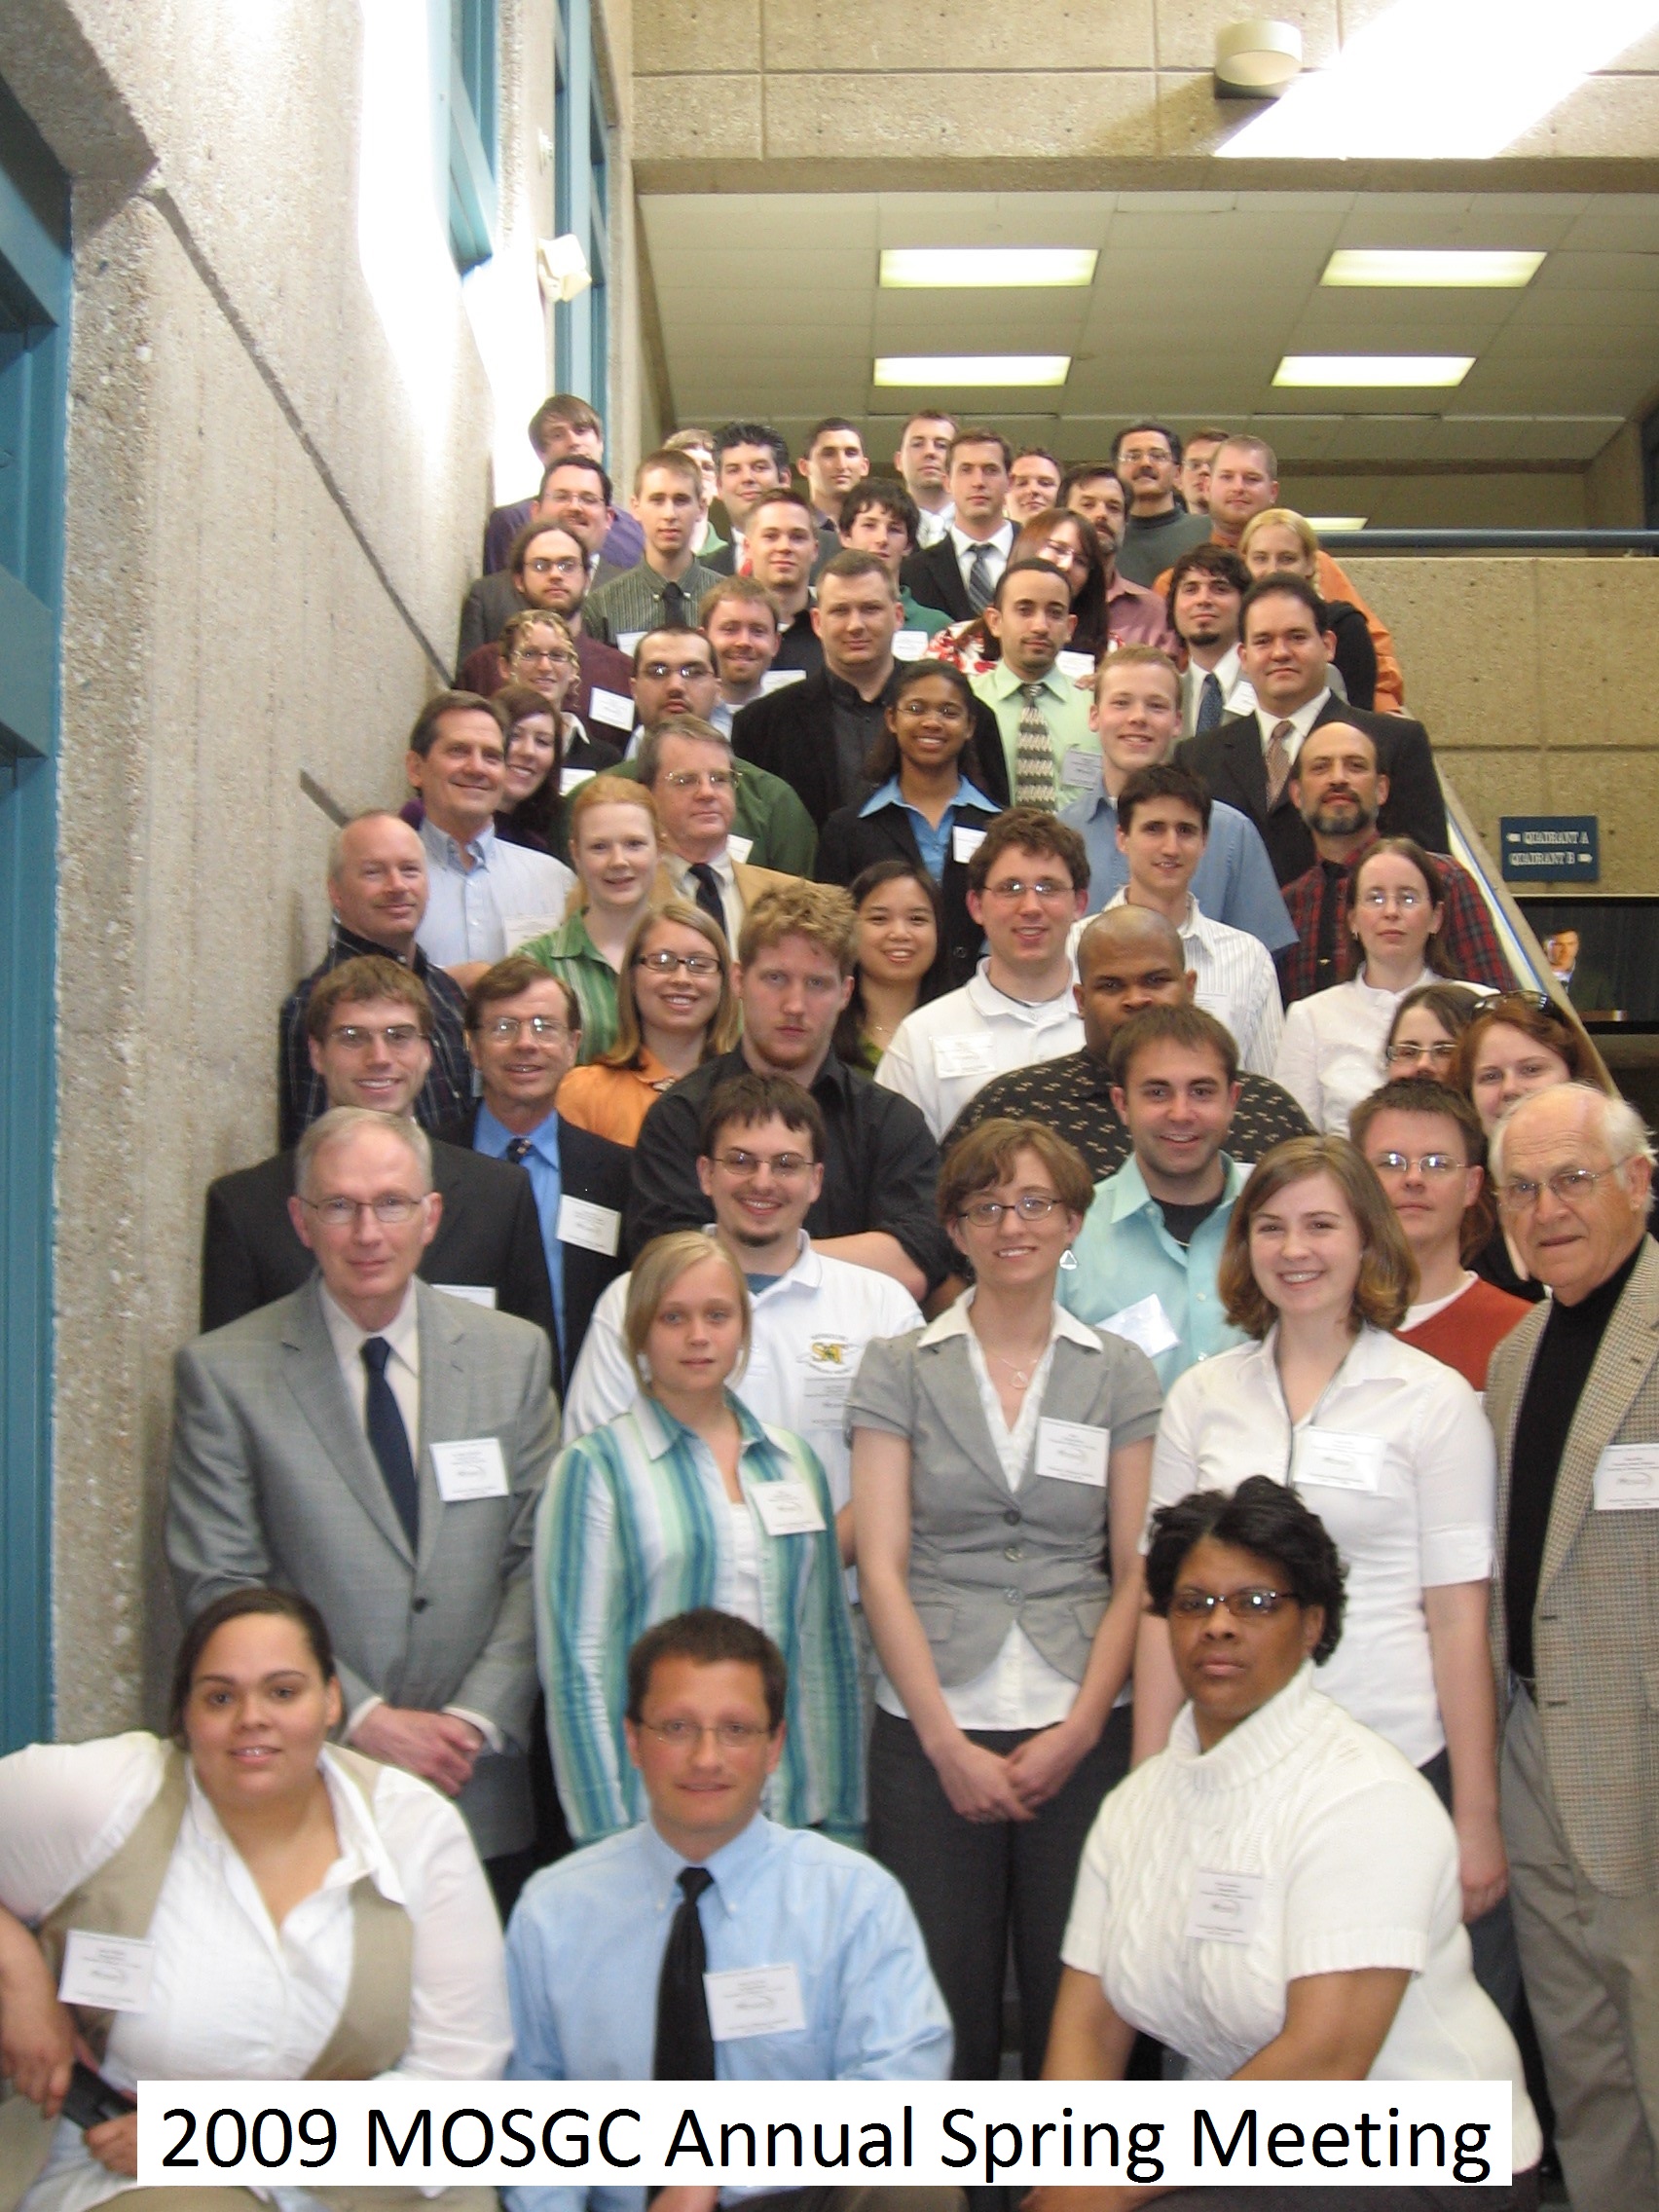 Group Photo of the 2009 MOSGC Annual Spring Meeting